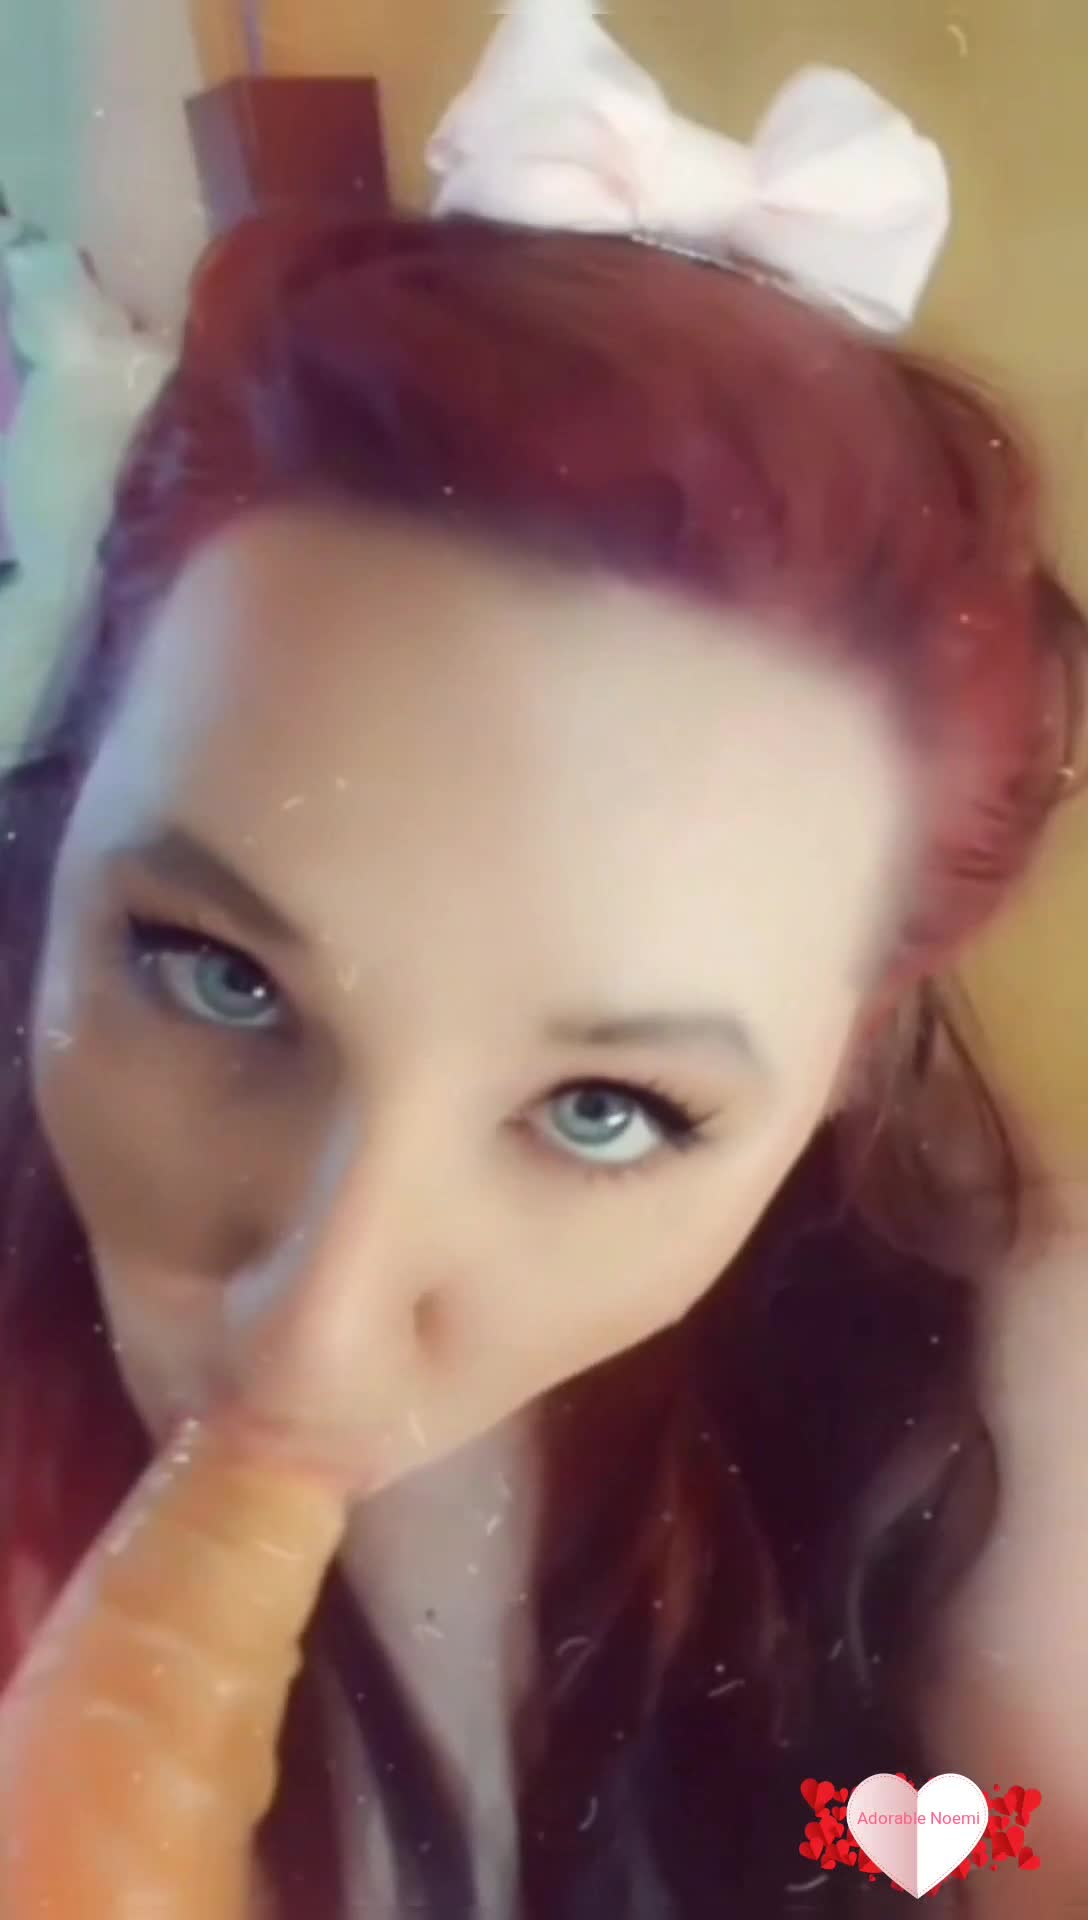 Adorable Noemi - Blowjob Swallowing / Drooling Compilation